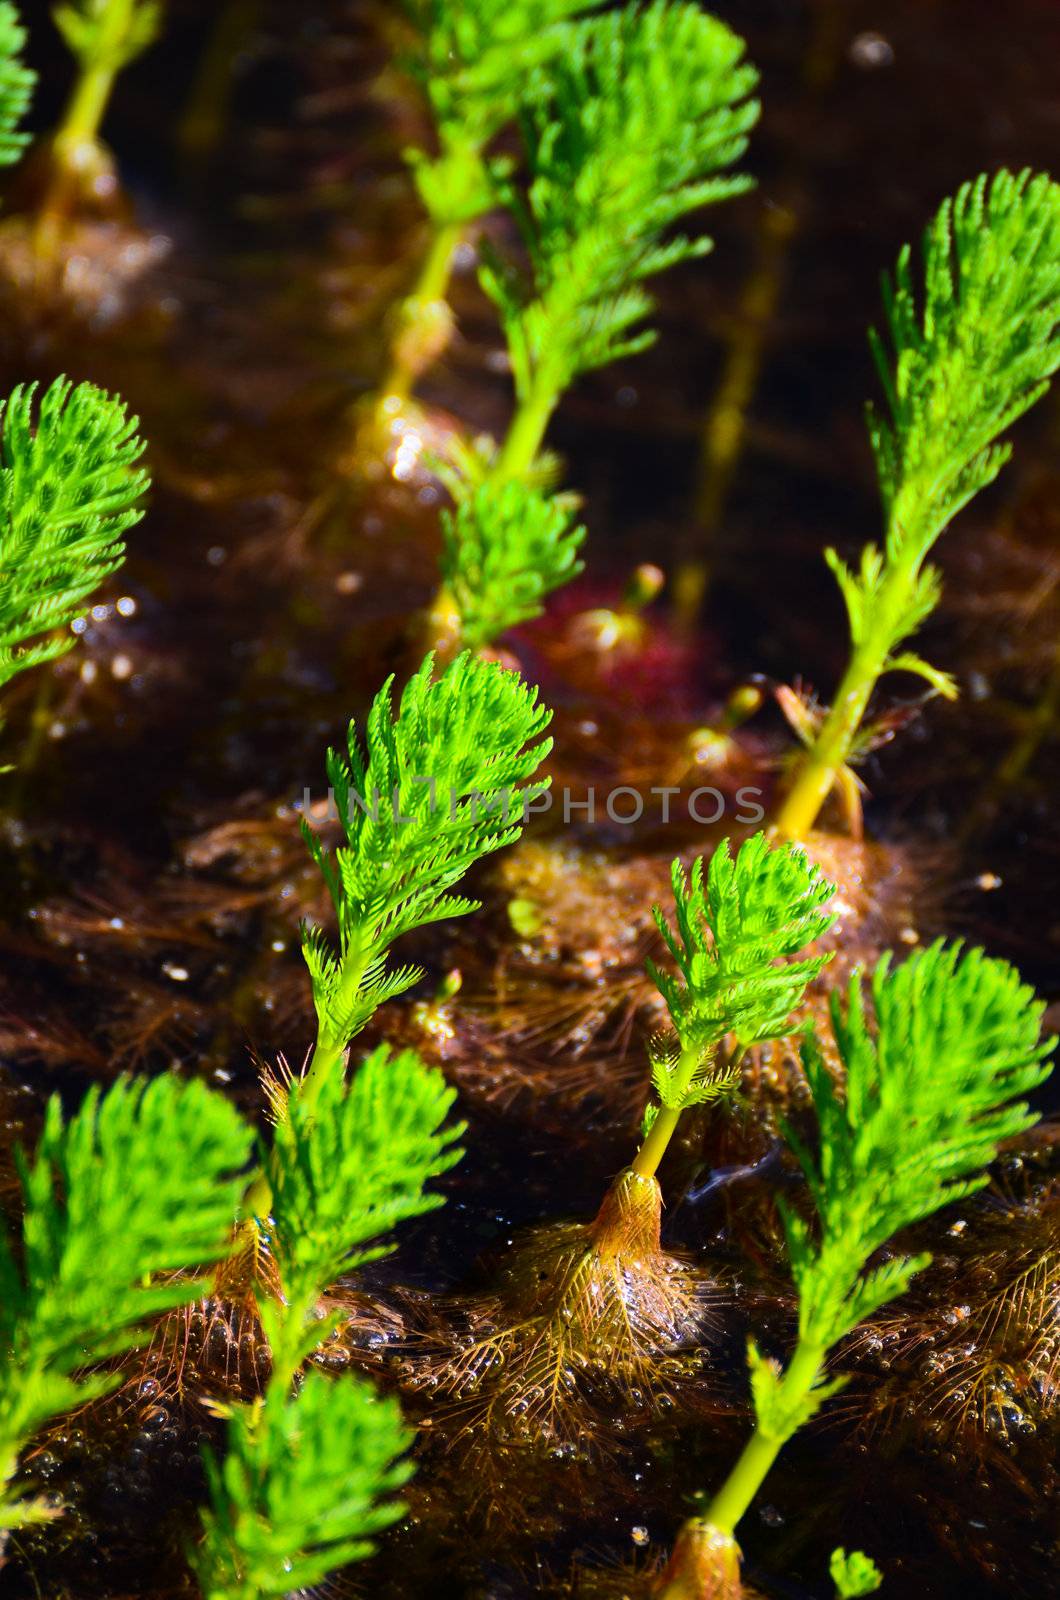 Aquatic plants in the pond. by chatchai